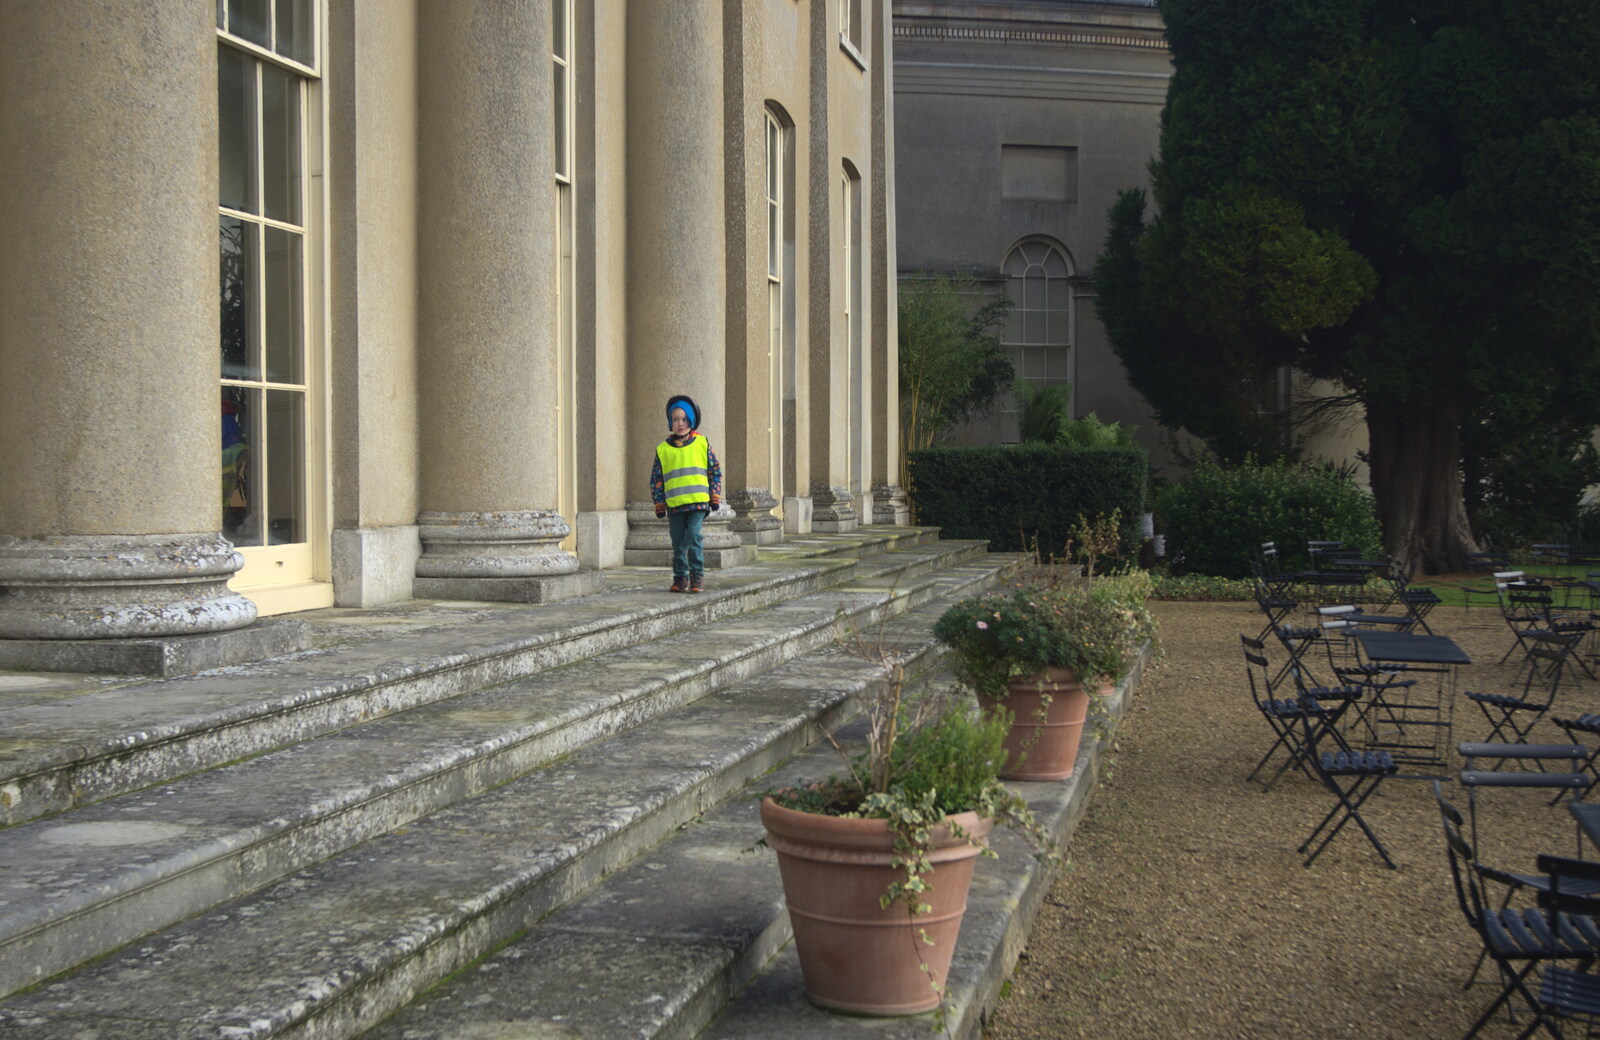 Harry outside the Orangery from A Trip to Ickworth House, Horringer, Suffolk - 30th December 2016